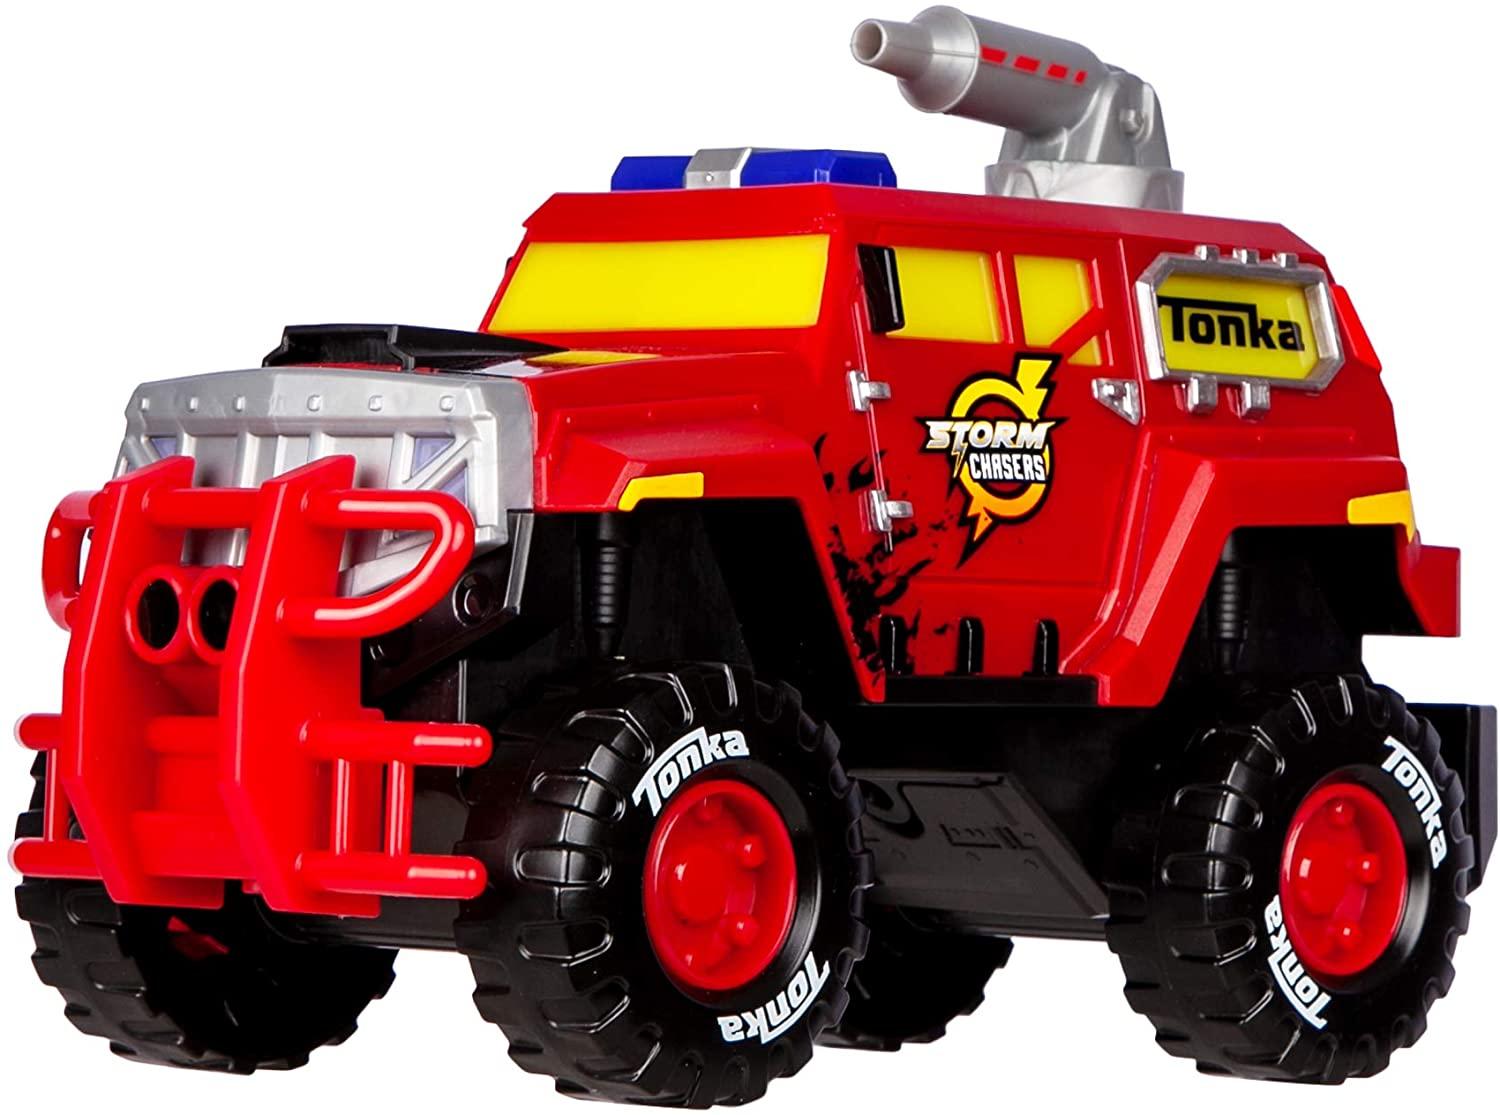 Tonka Mega Machines Storm Chasers Wild Fire Rescue Toy Vehicle for $8.18